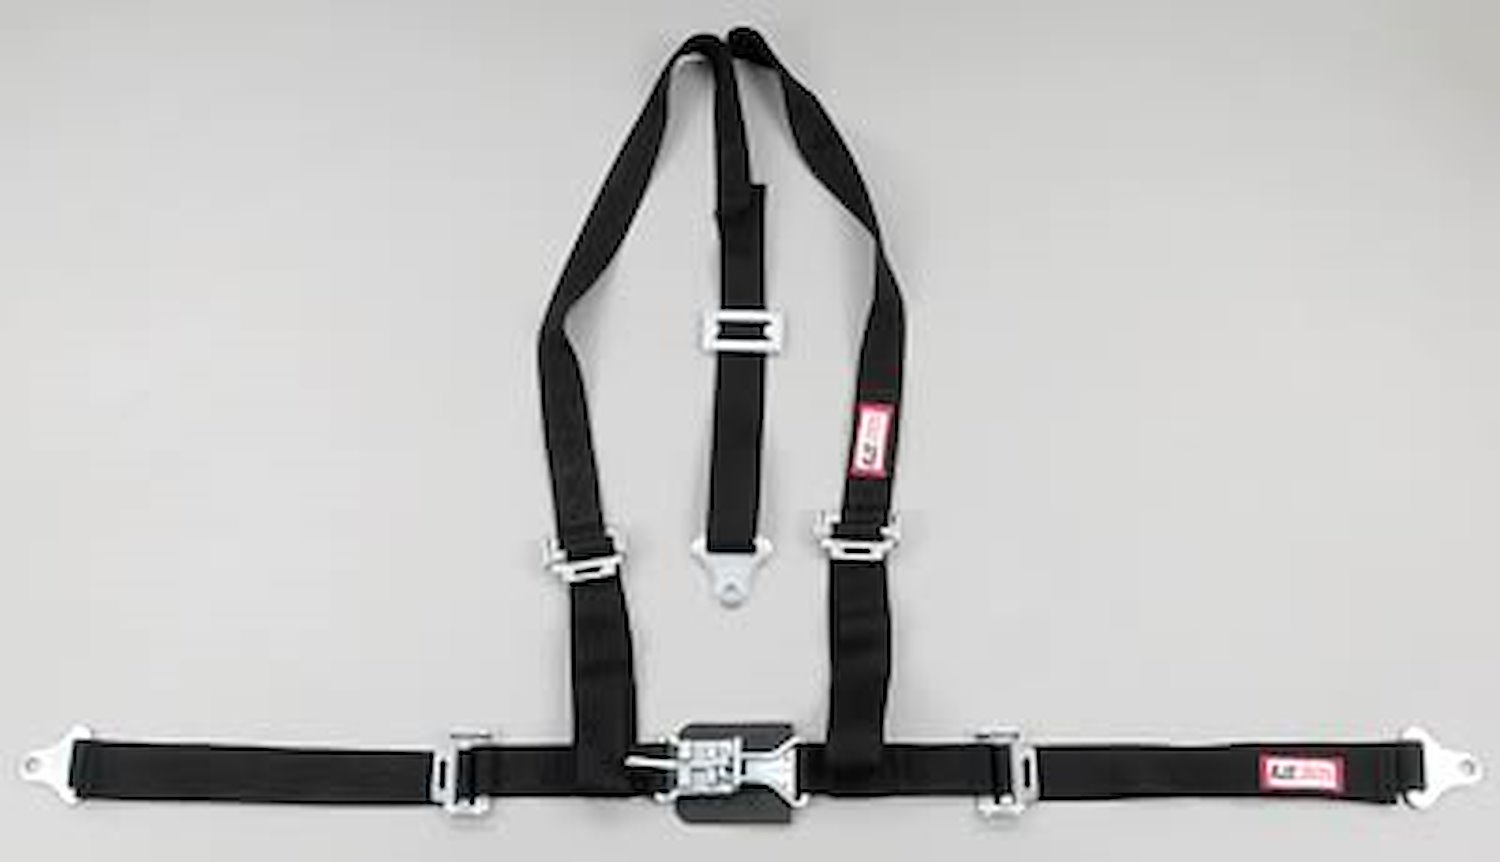 NON-SFI L&L HARNESS 2 PULL UP Lap Belt BOLT SEWN IN 2 S.H. Y FLOOR Mount w/STERNUM STRAP WRAP/BOLT GRAY